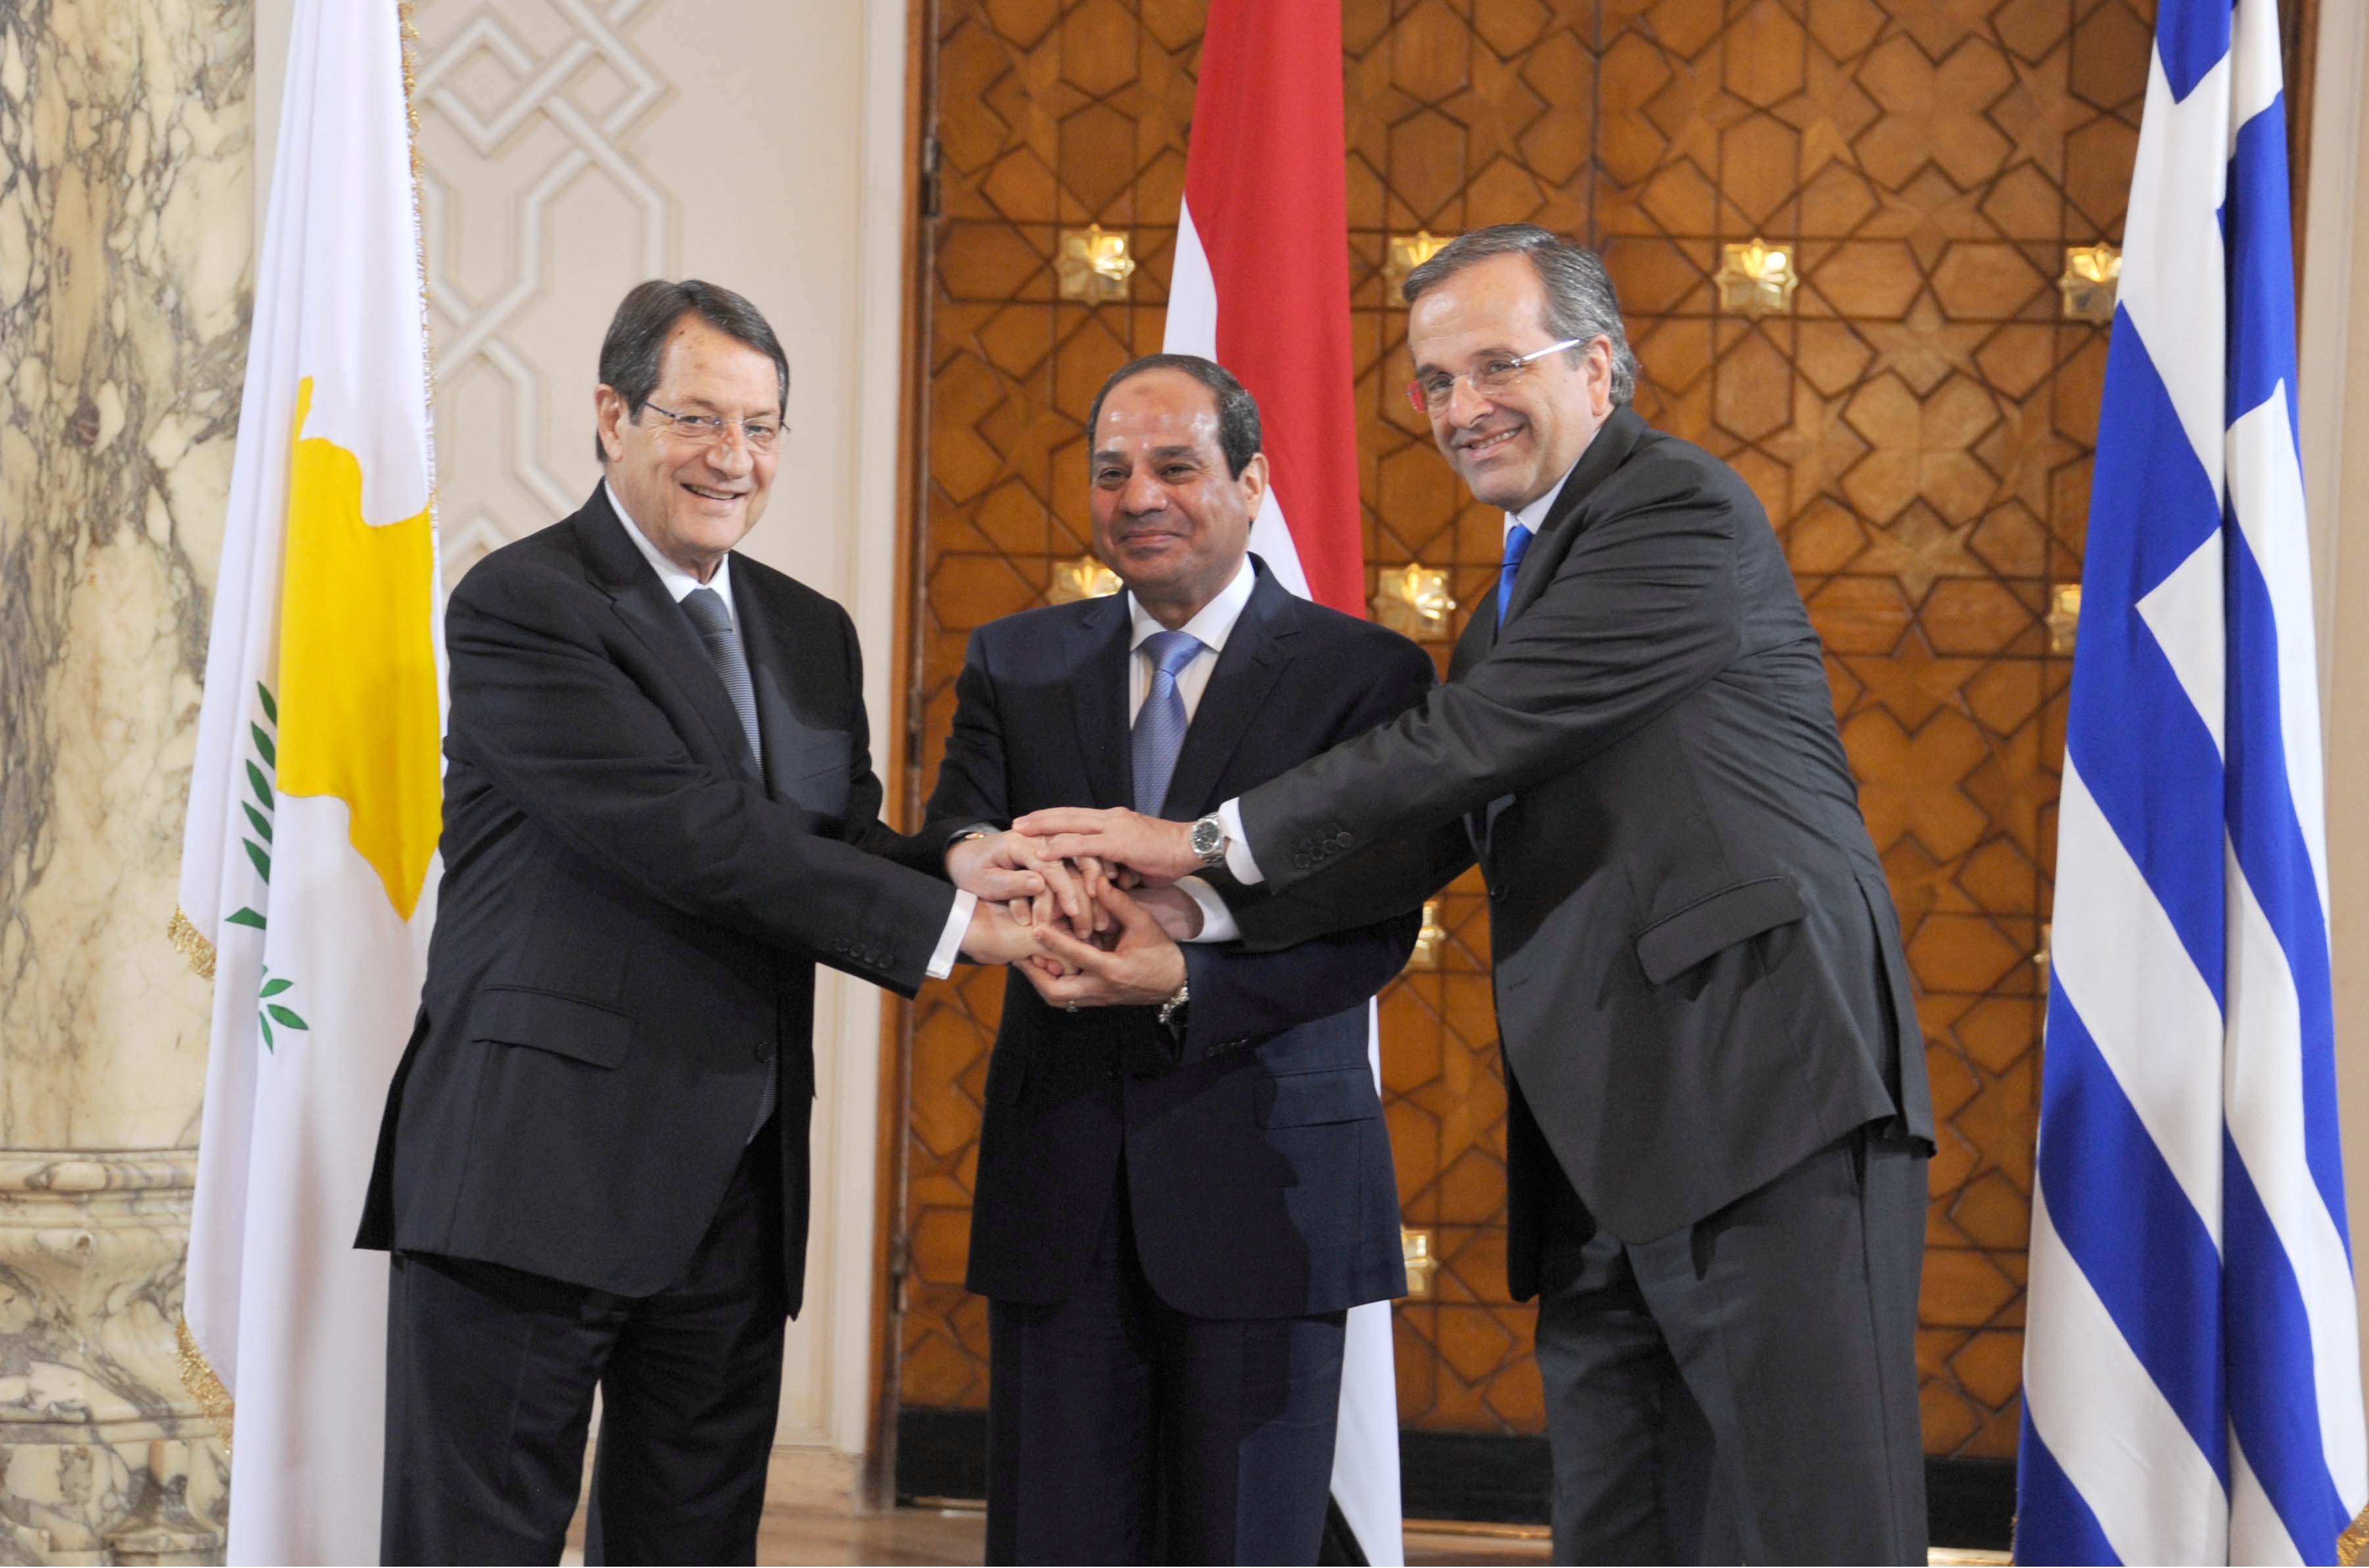 Sisi to visit Cyprus and Spain later in April - presidency